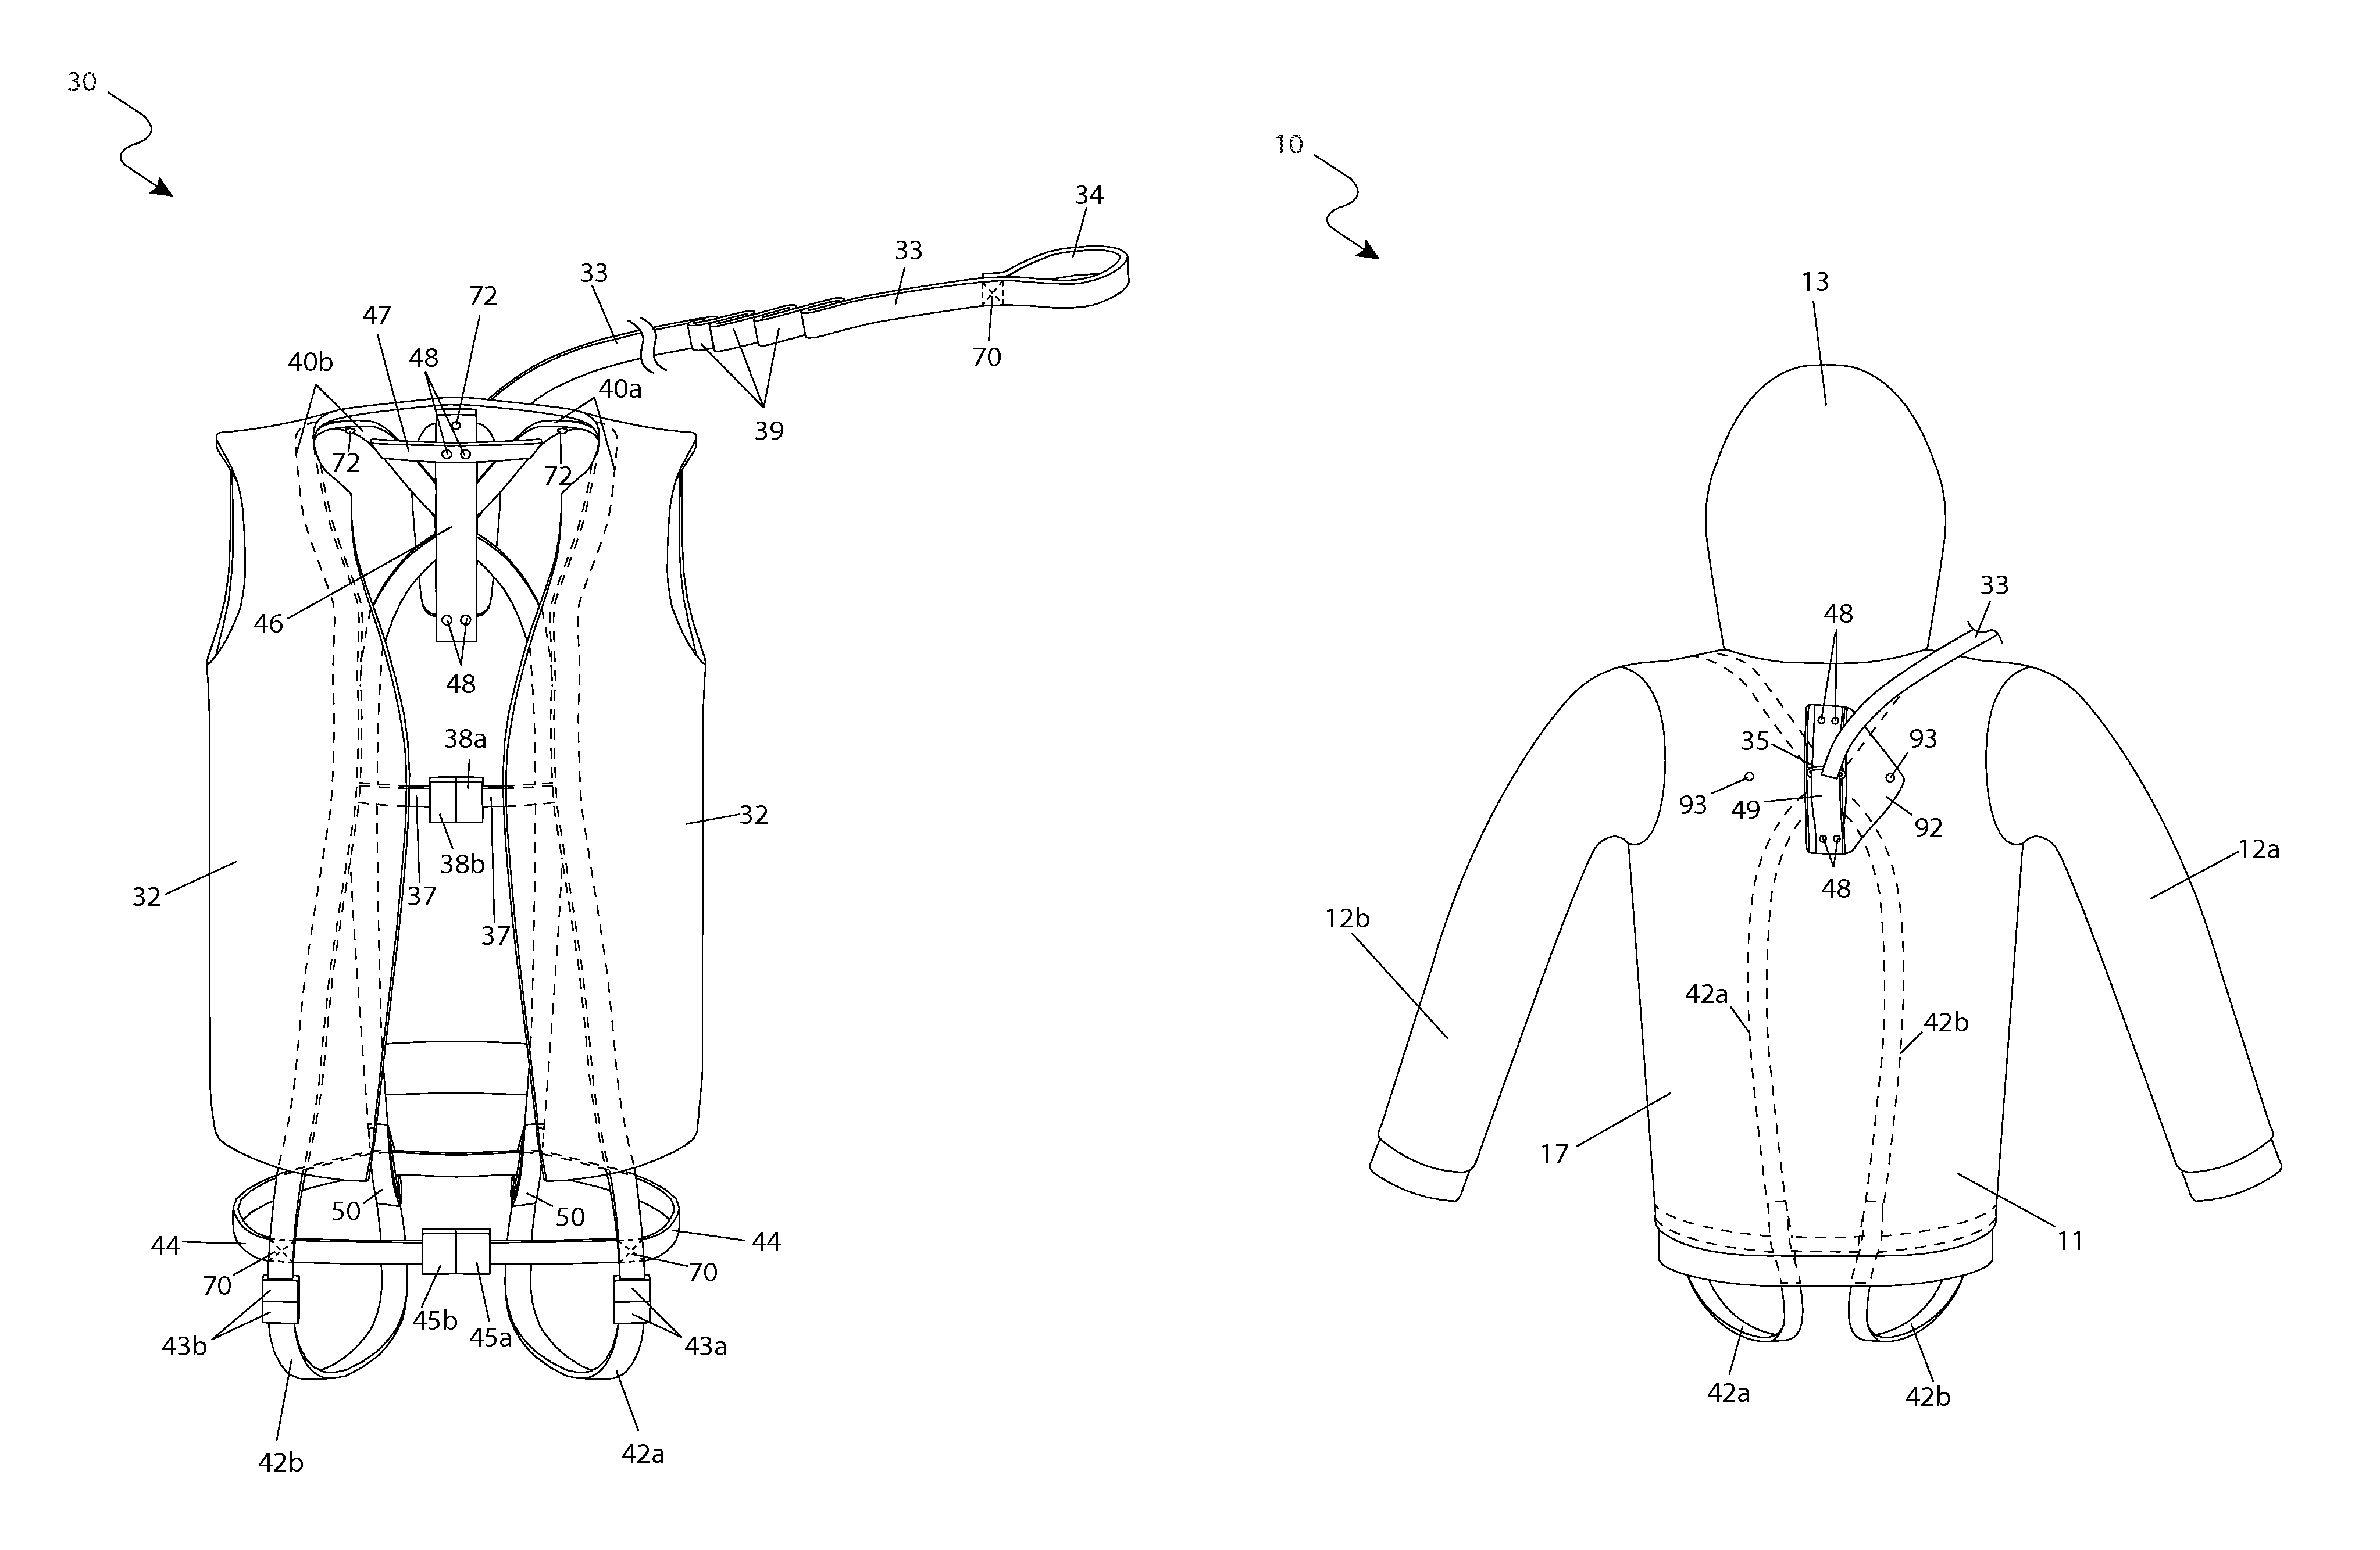 Hunting garment and saftey harness system